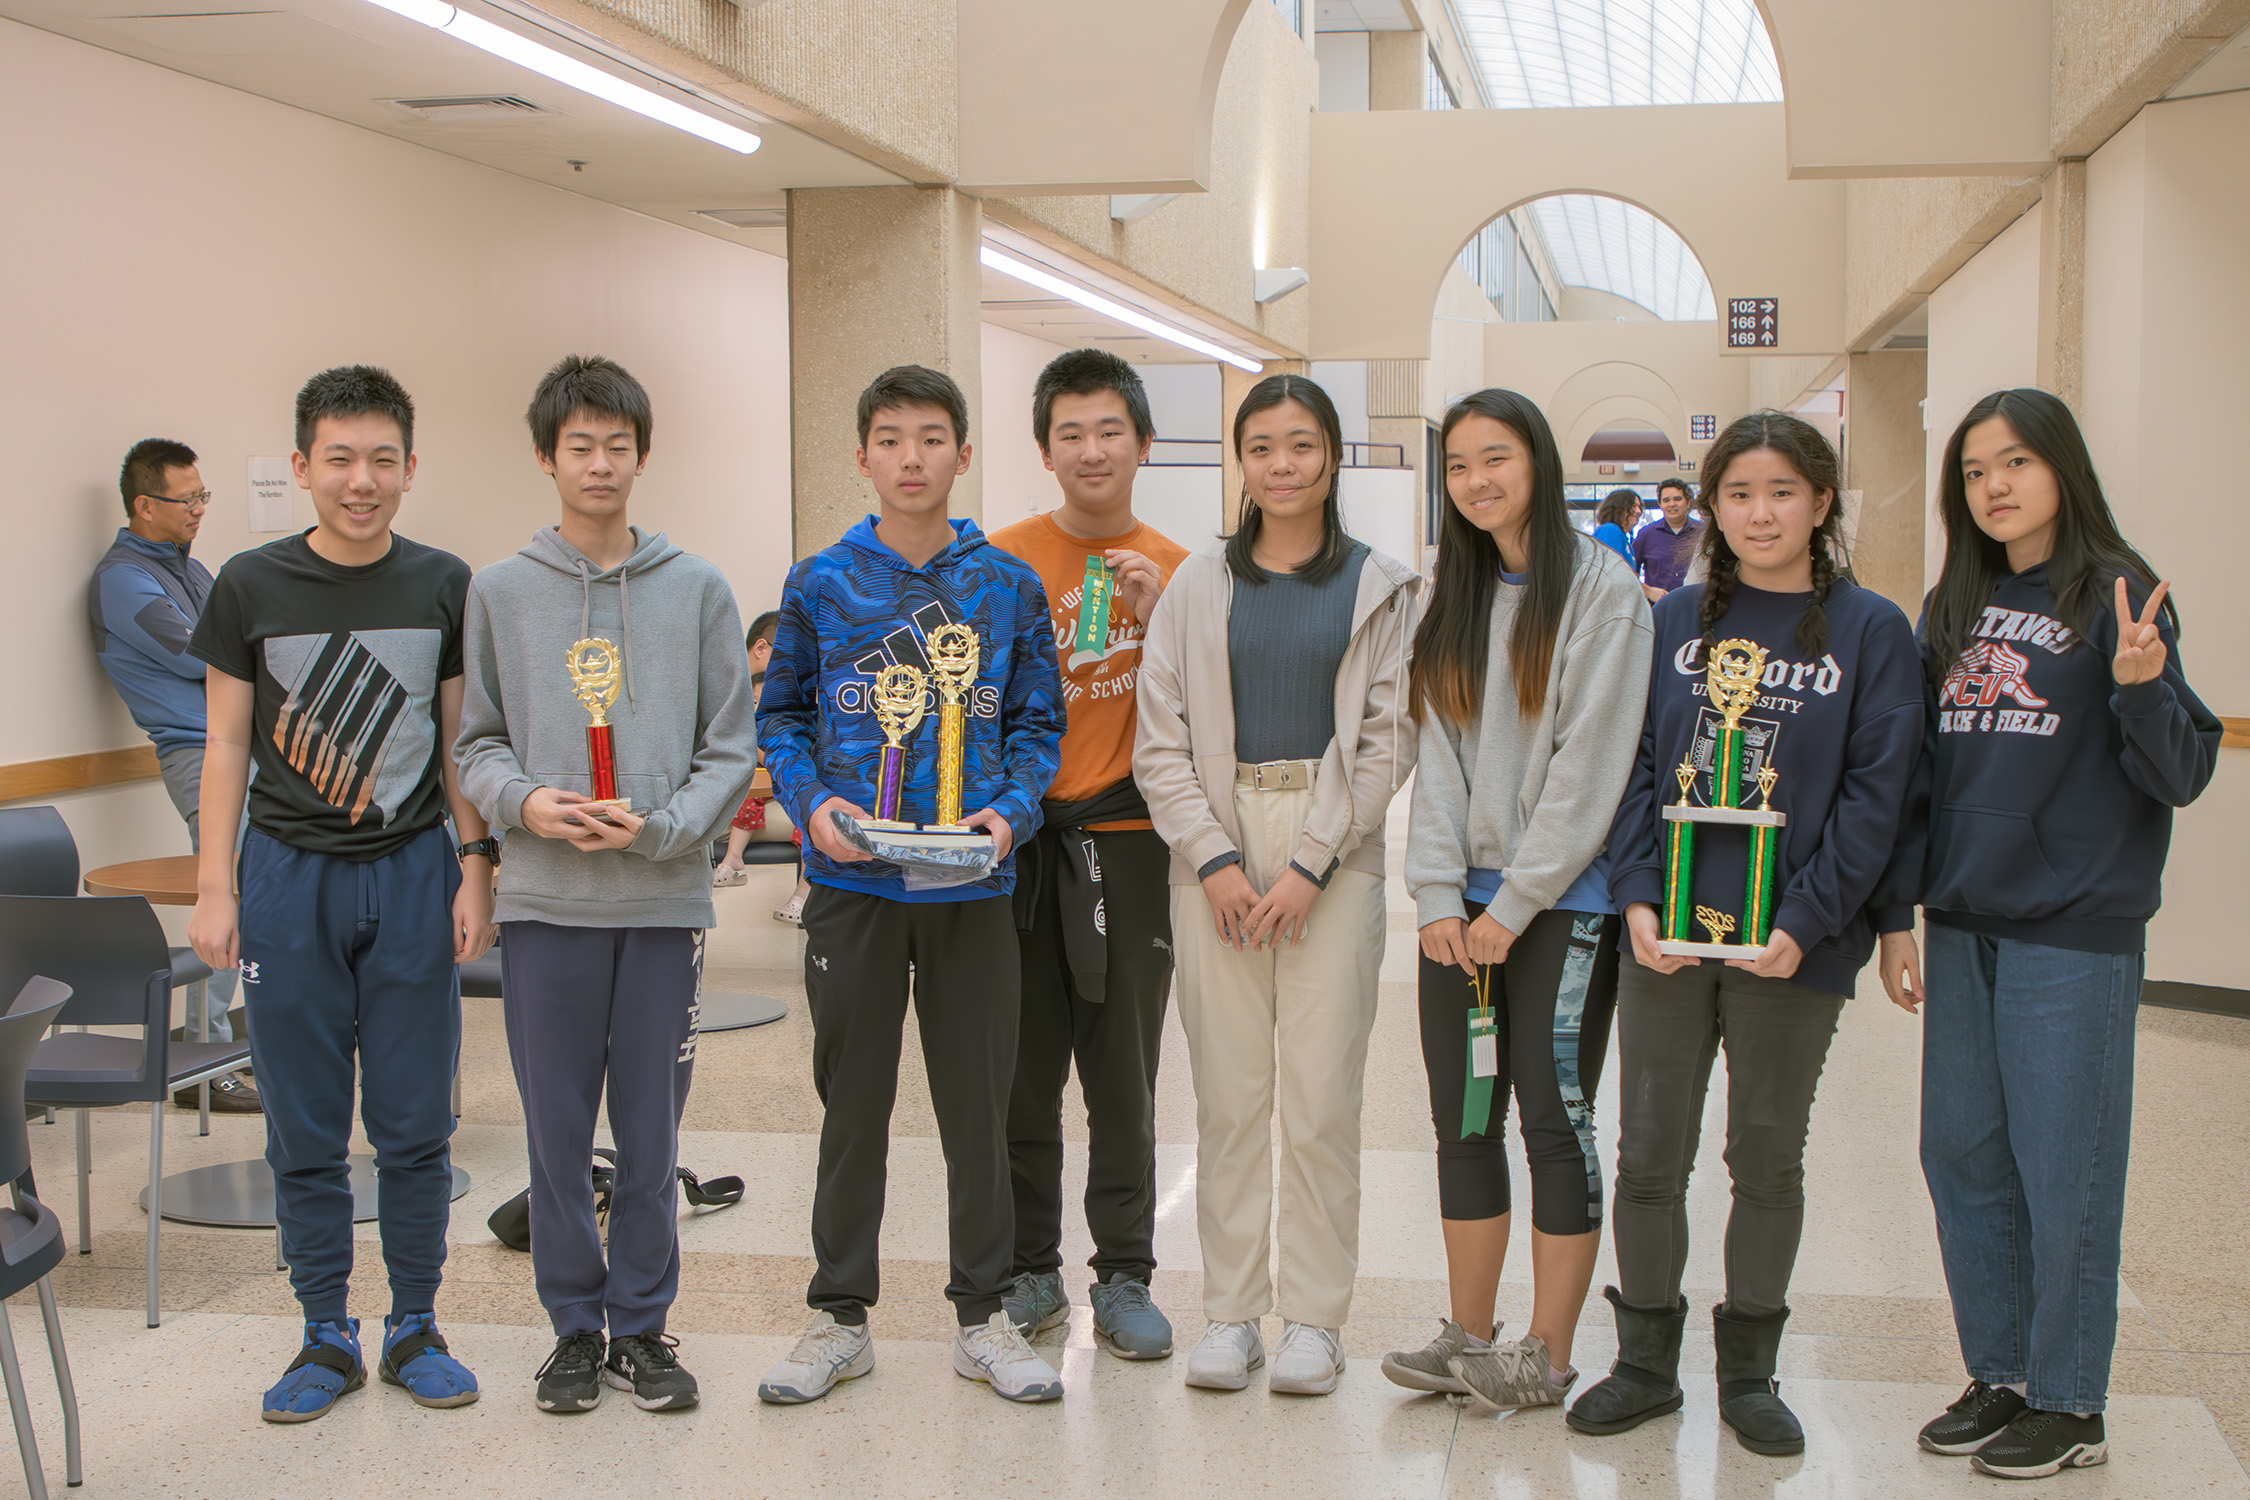 A group of students pose with their trophies and ribbons at the 2023 Texas A&M High School Mathematics Contest